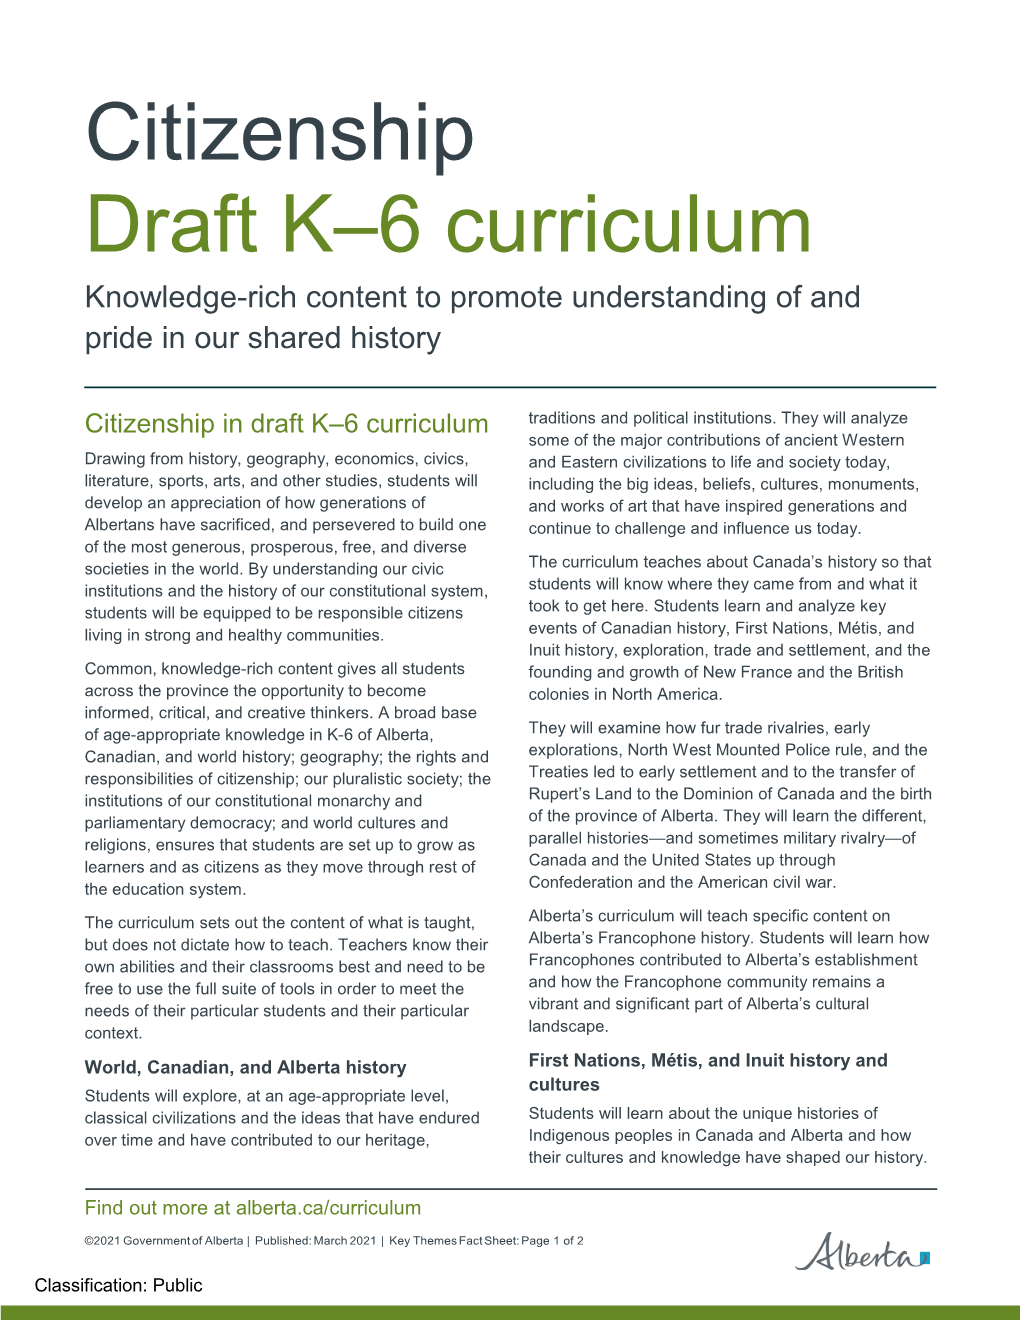 Citizenship Draft K–6 Curriculum Knowledge-Rich Content to Promote Understanding of and Pride in Our Shared History